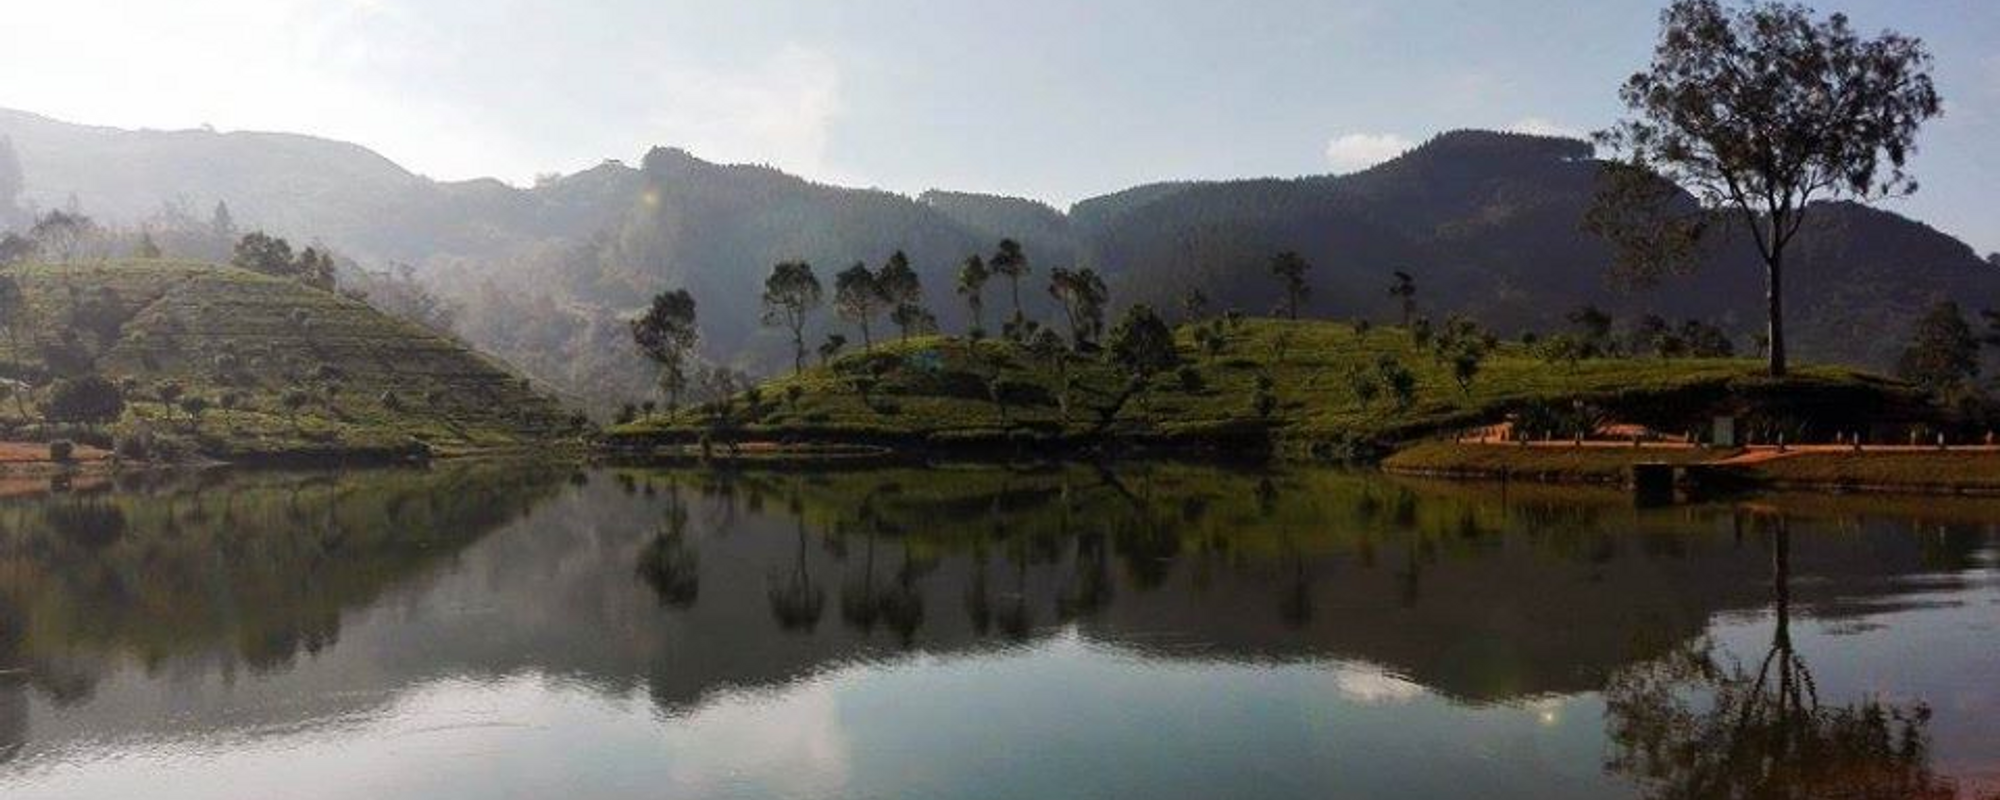 Sembuwatte Lake is situated in a beautiful green mountains with a thick pine forest, reflecting the superb environment.